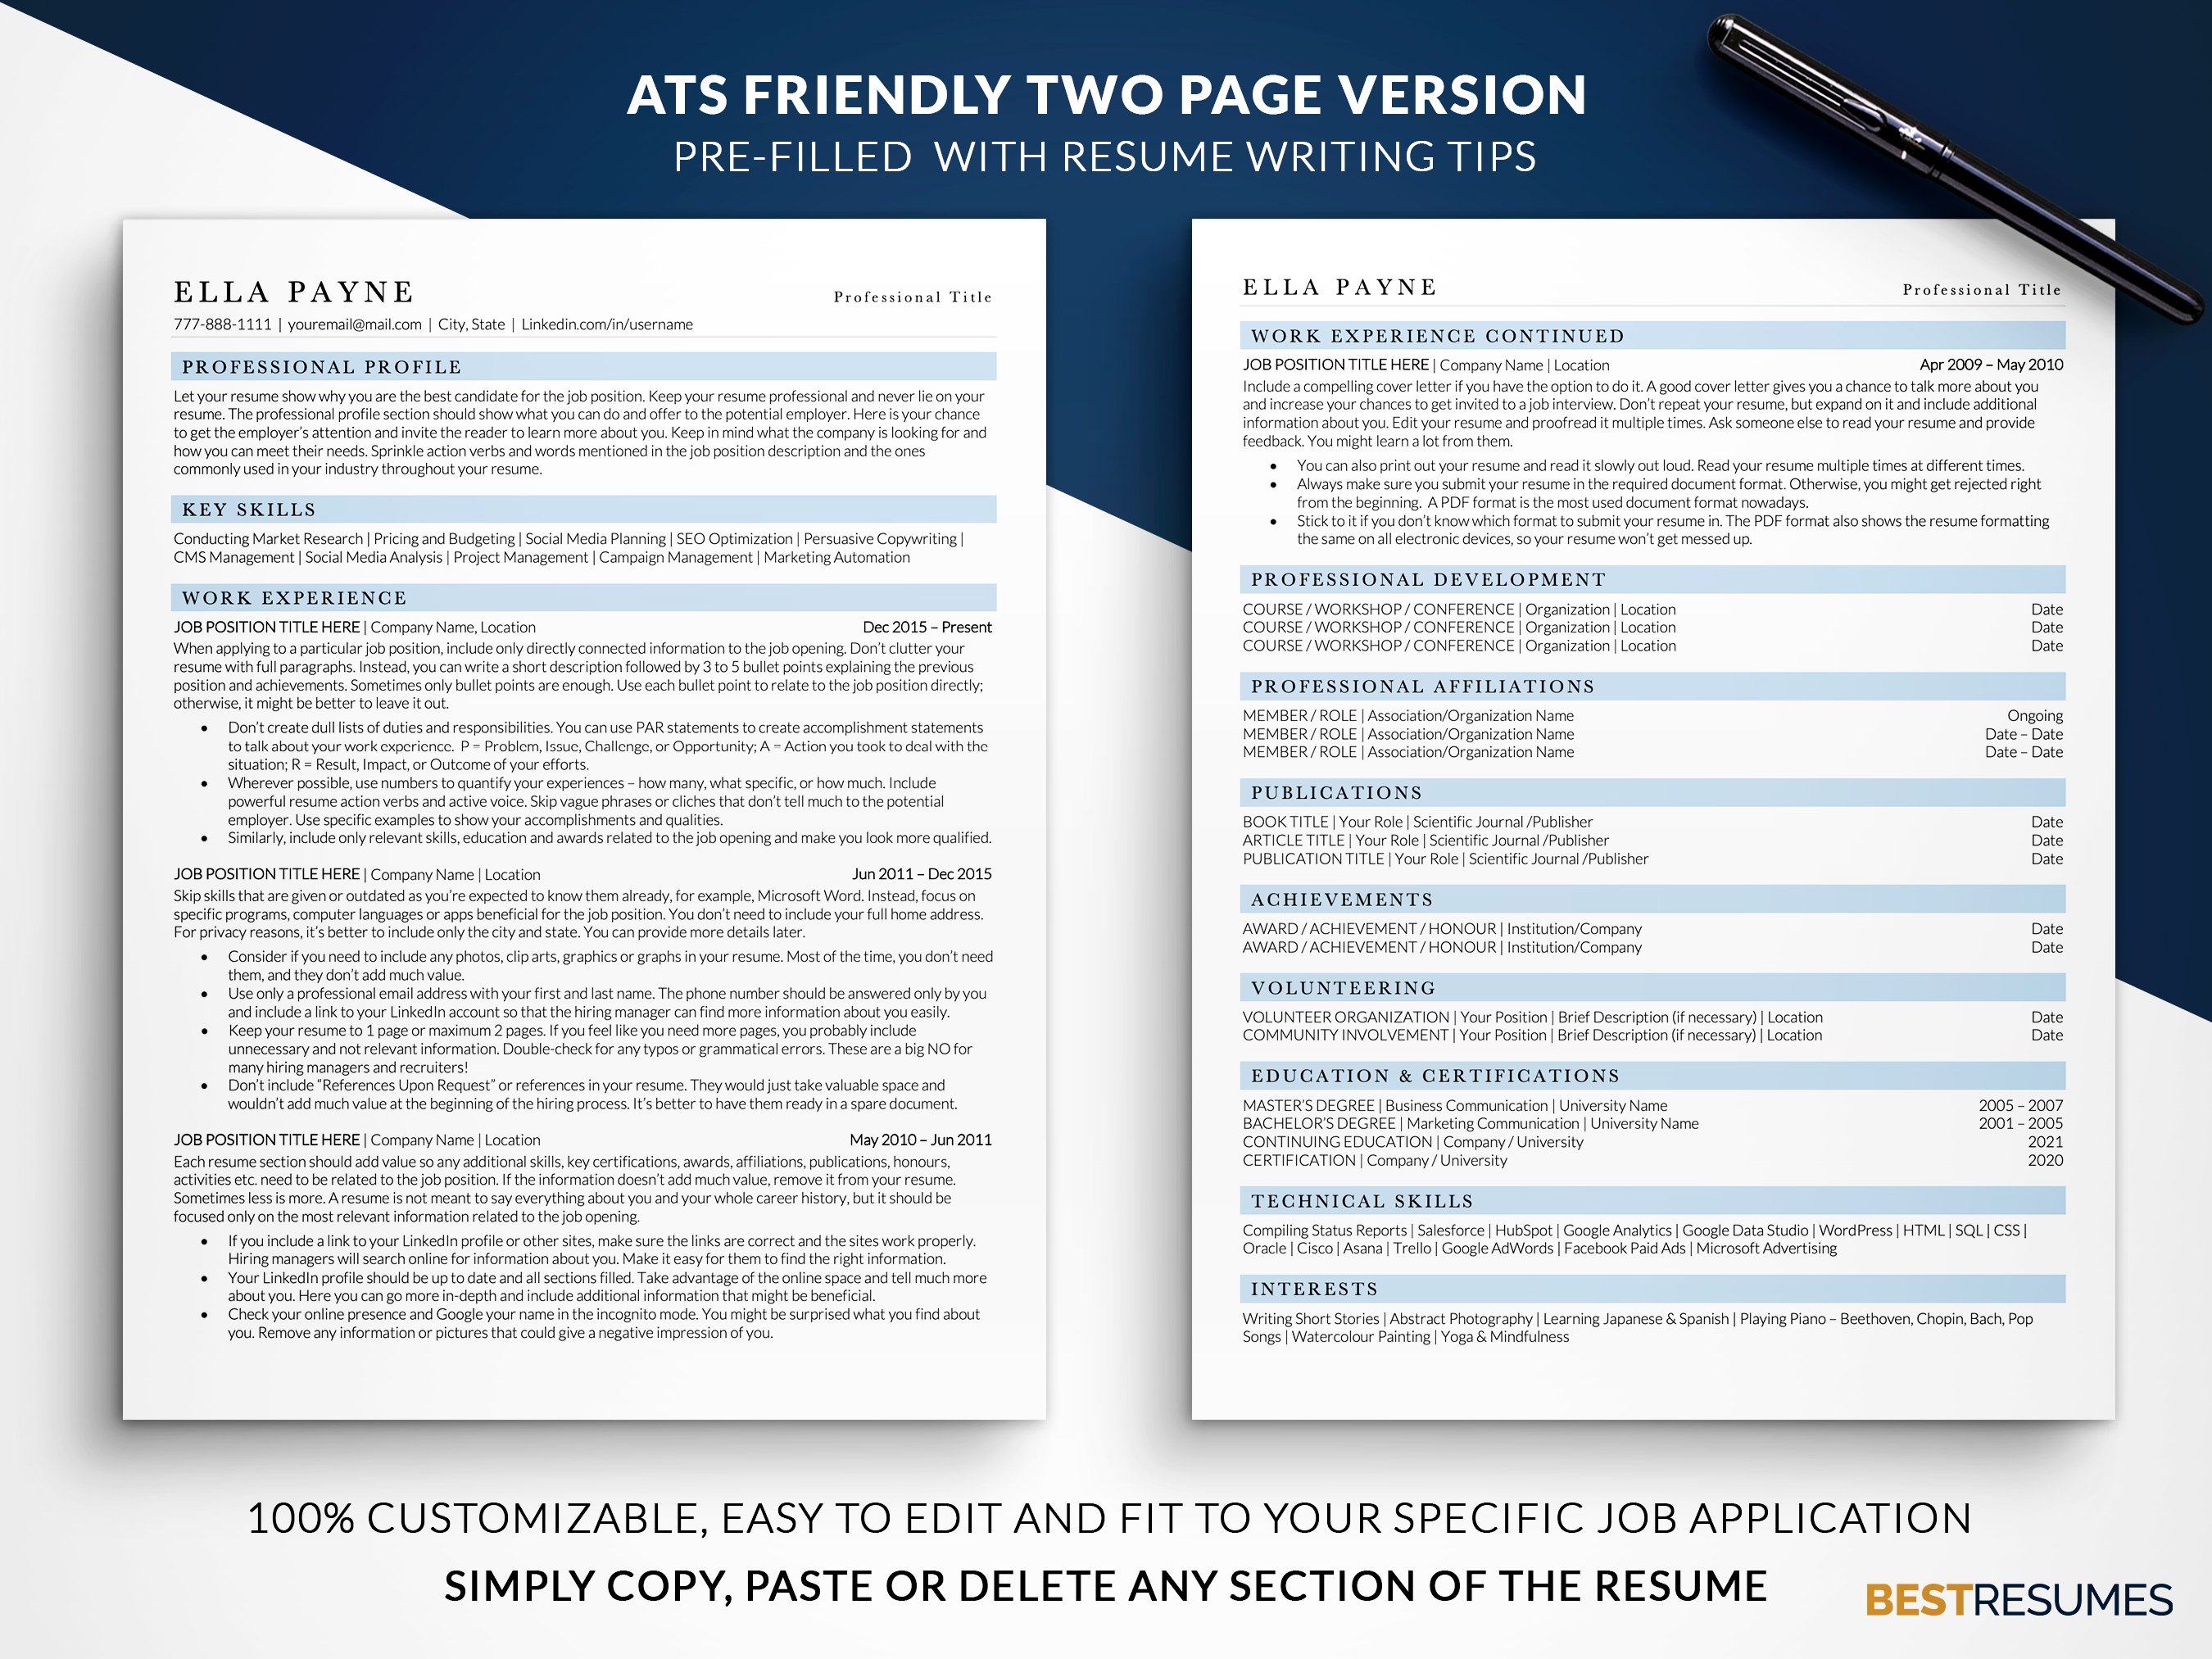 ats optimized resume template two page template ella payne 46